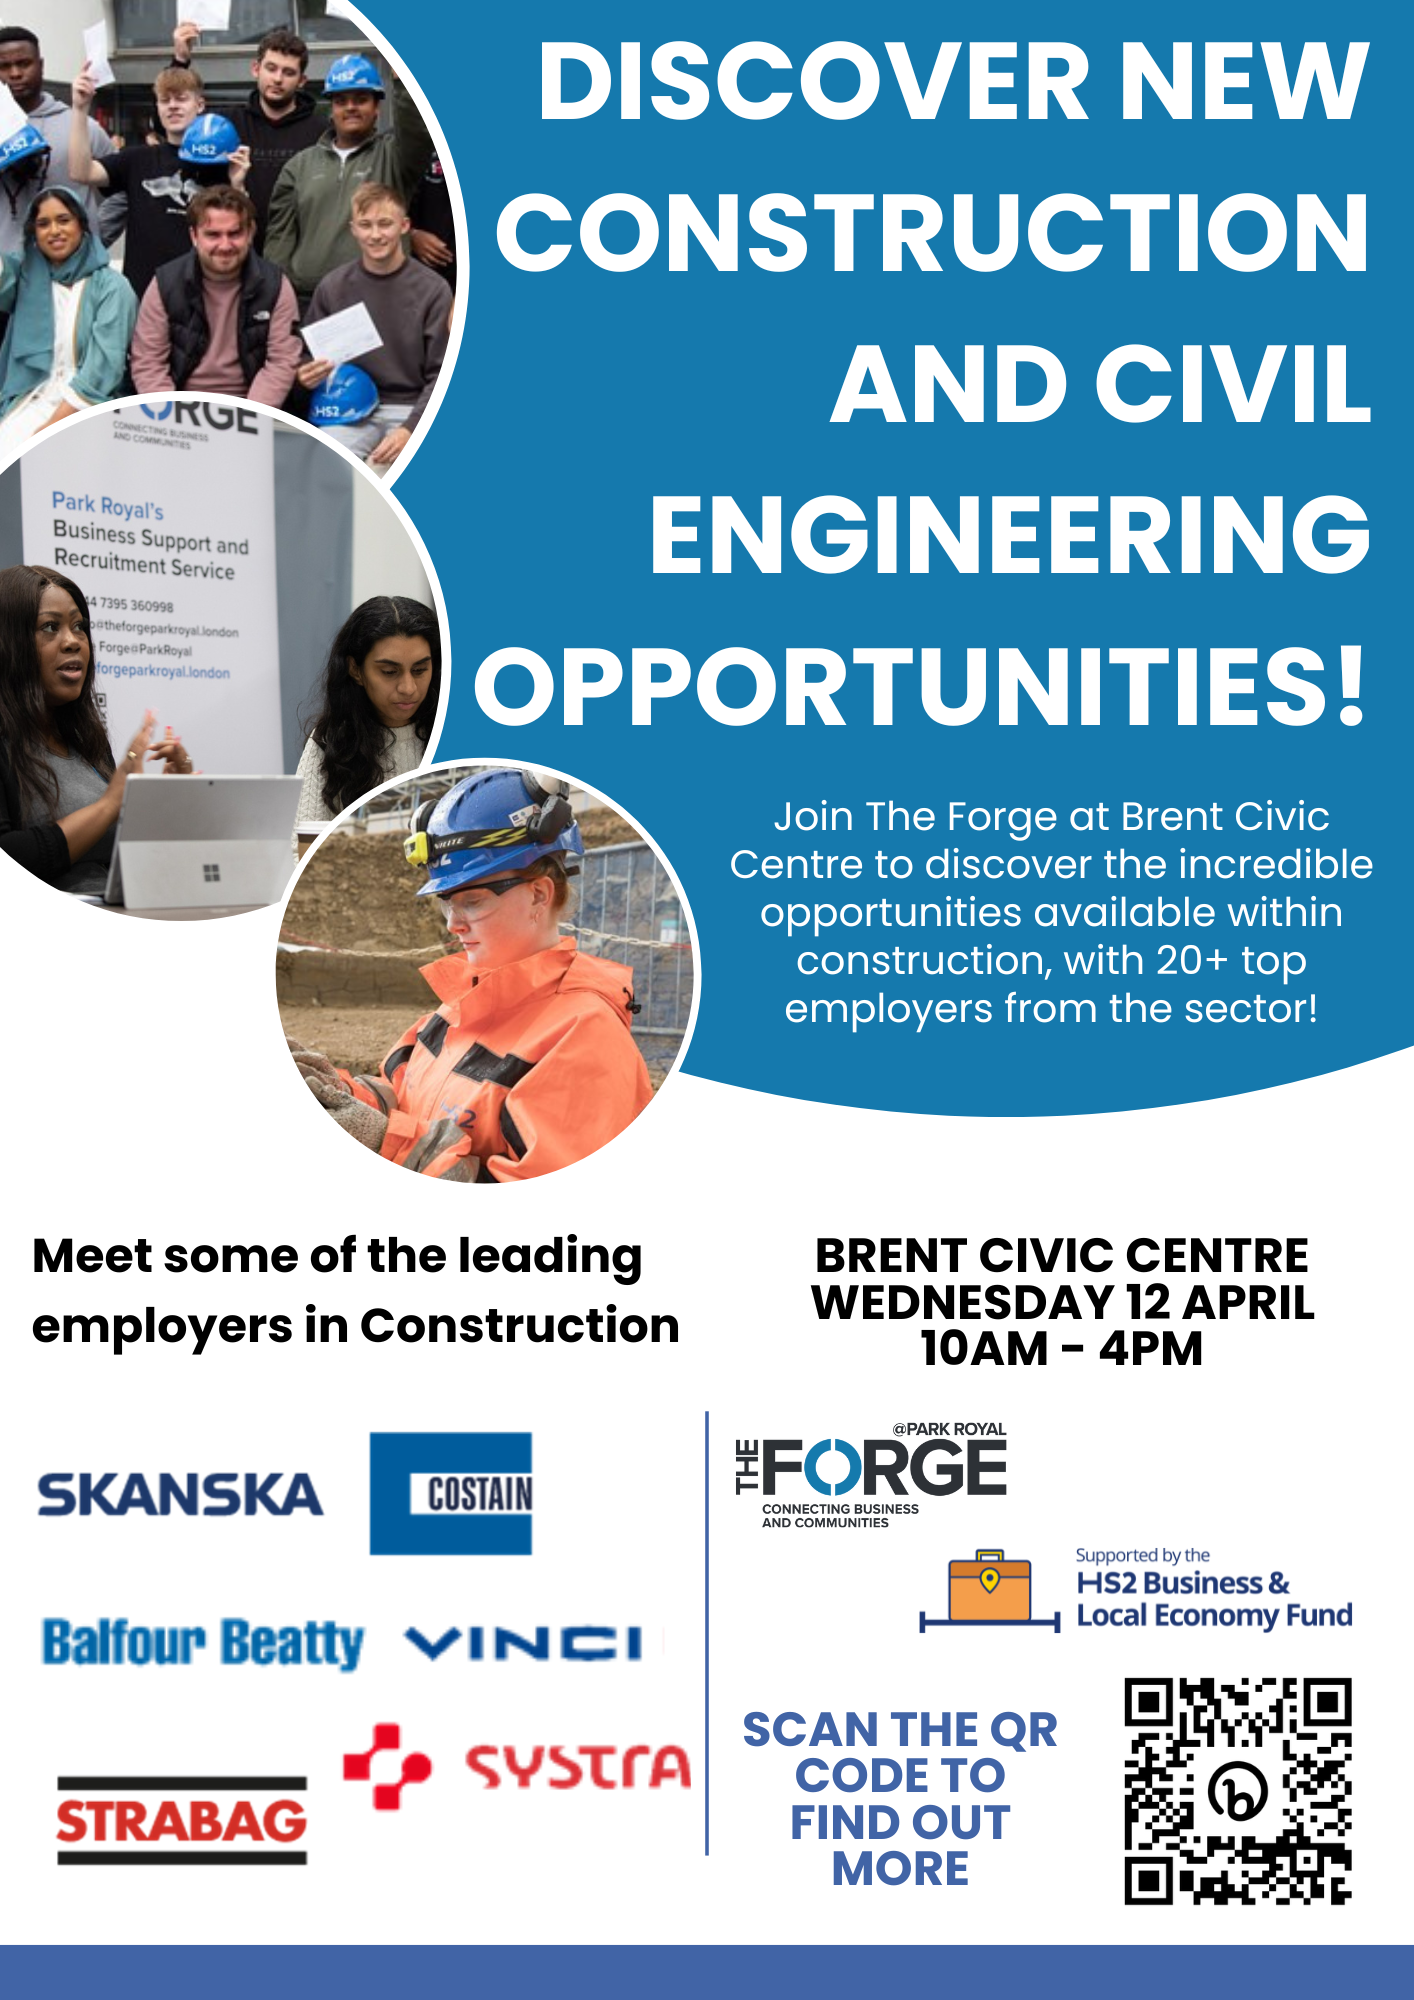 Construction and Built Environment Careers Fair Image